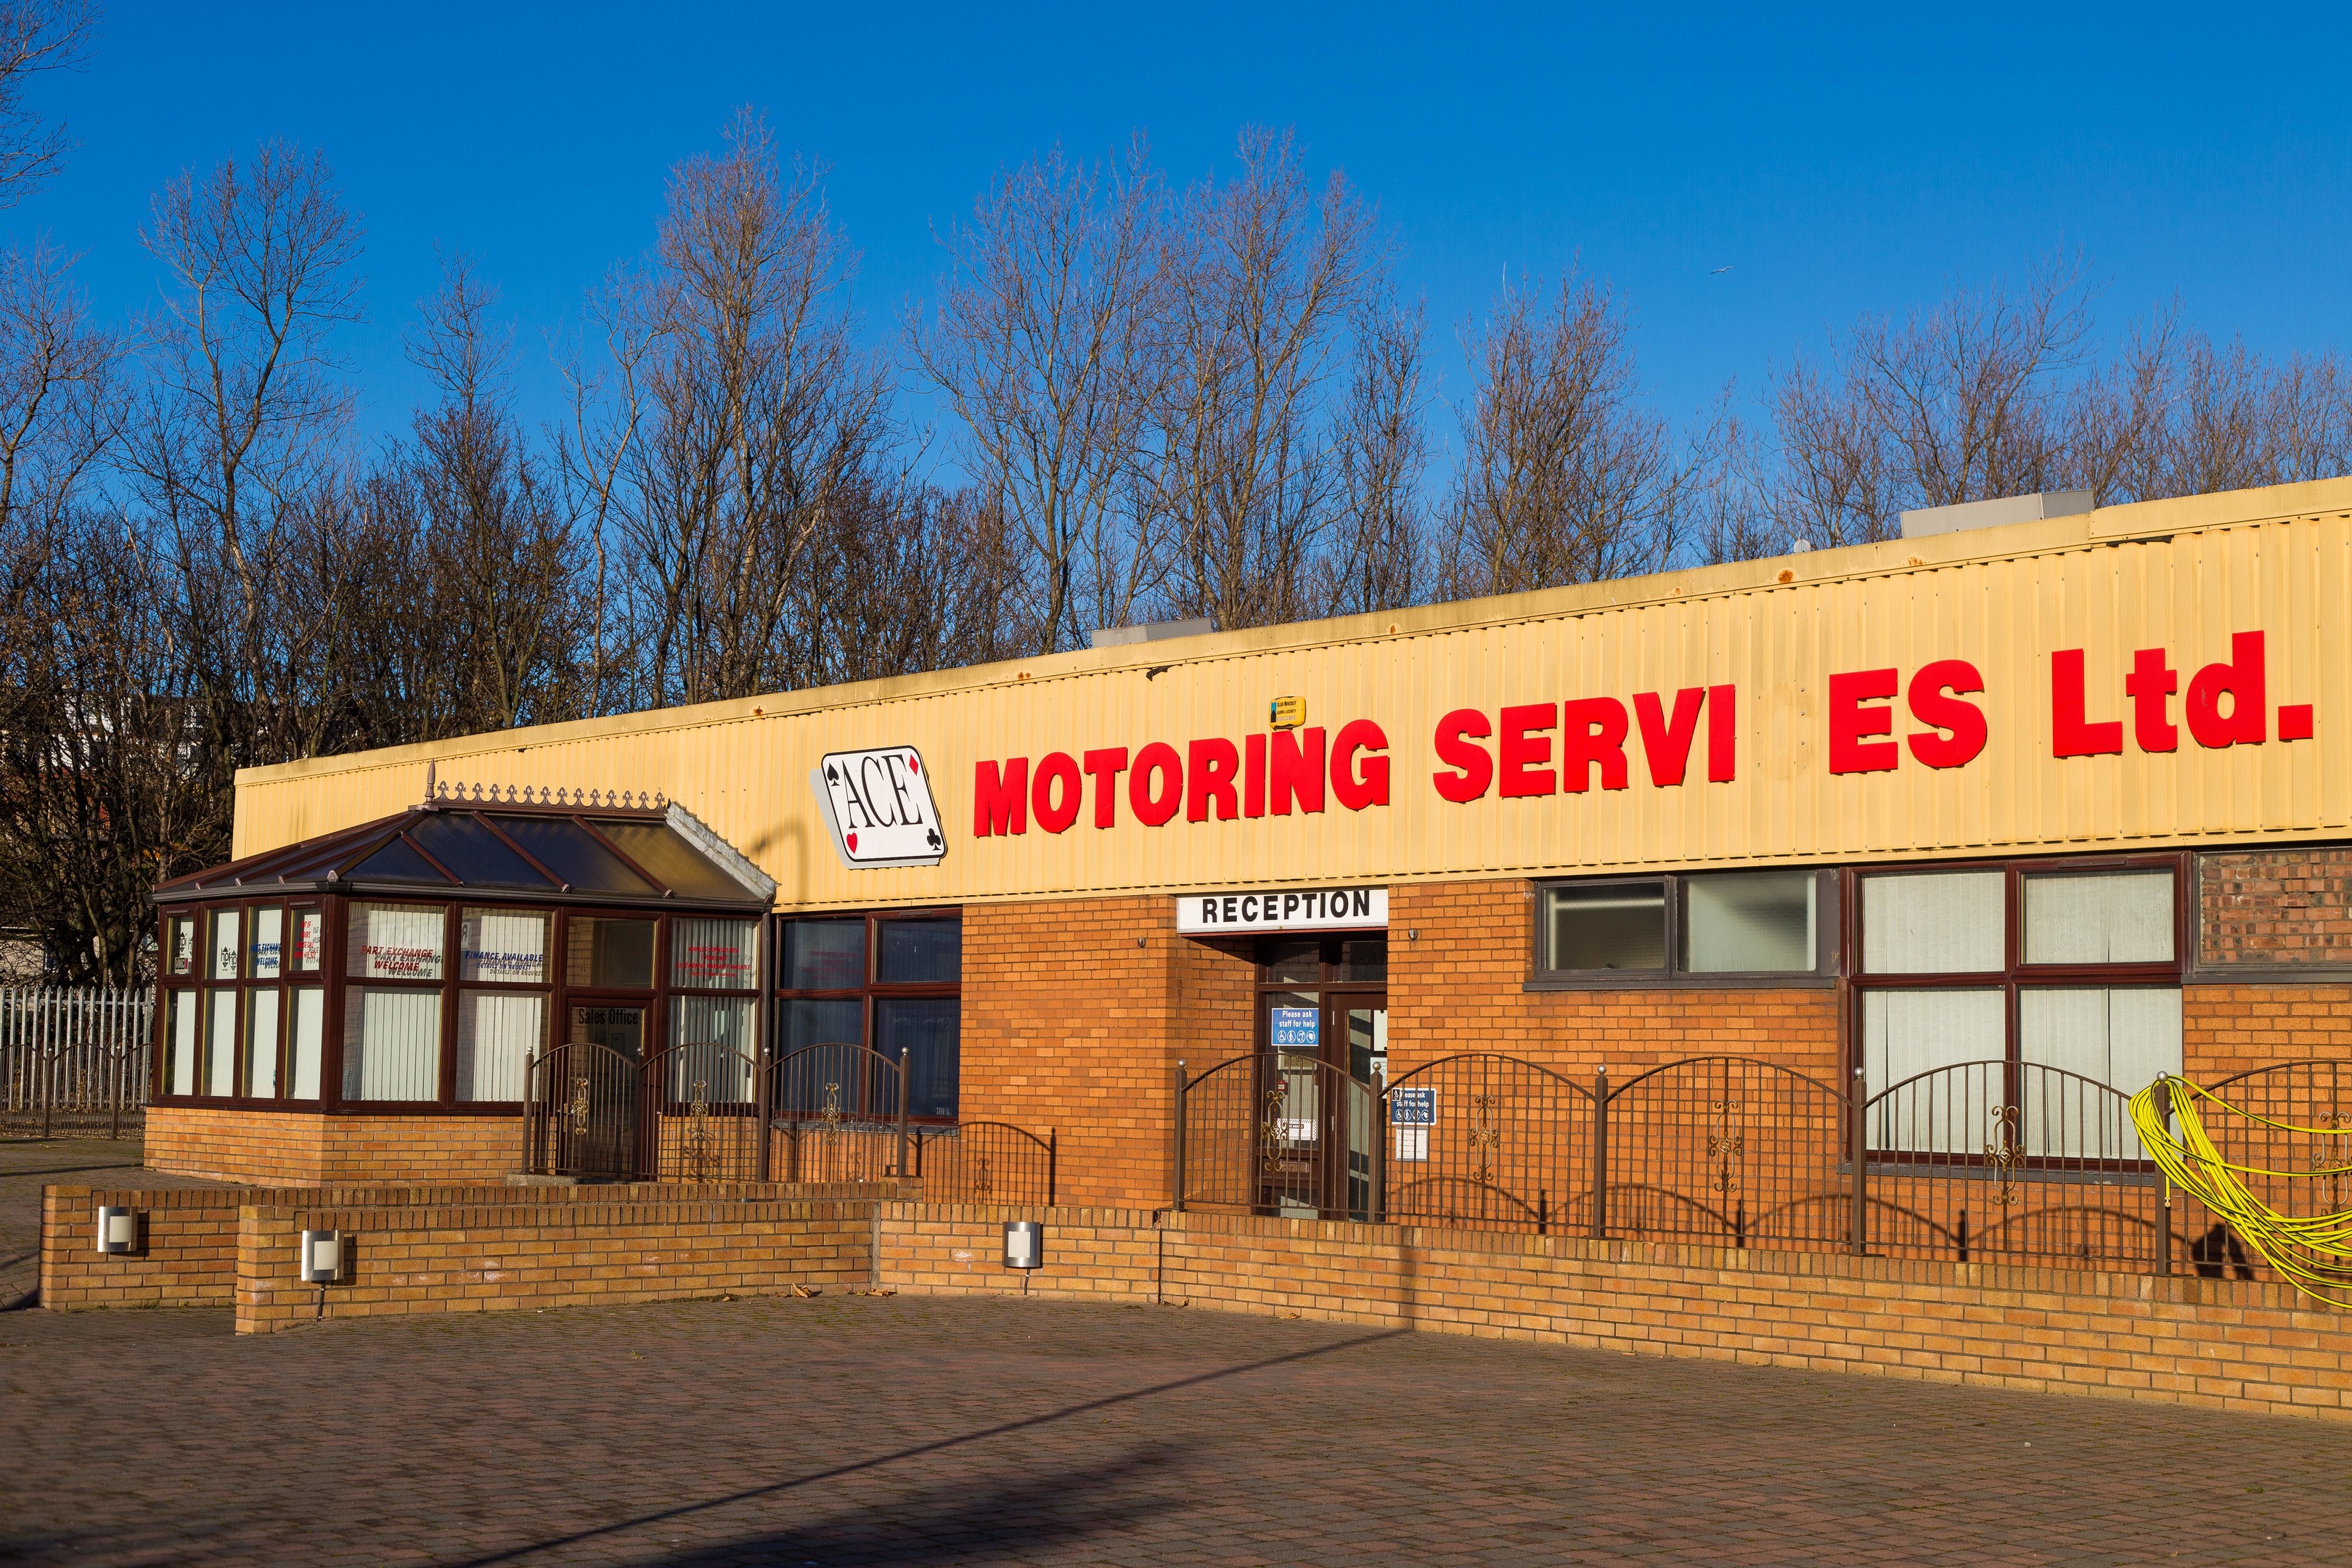 Ace Motoring Services is being wound up